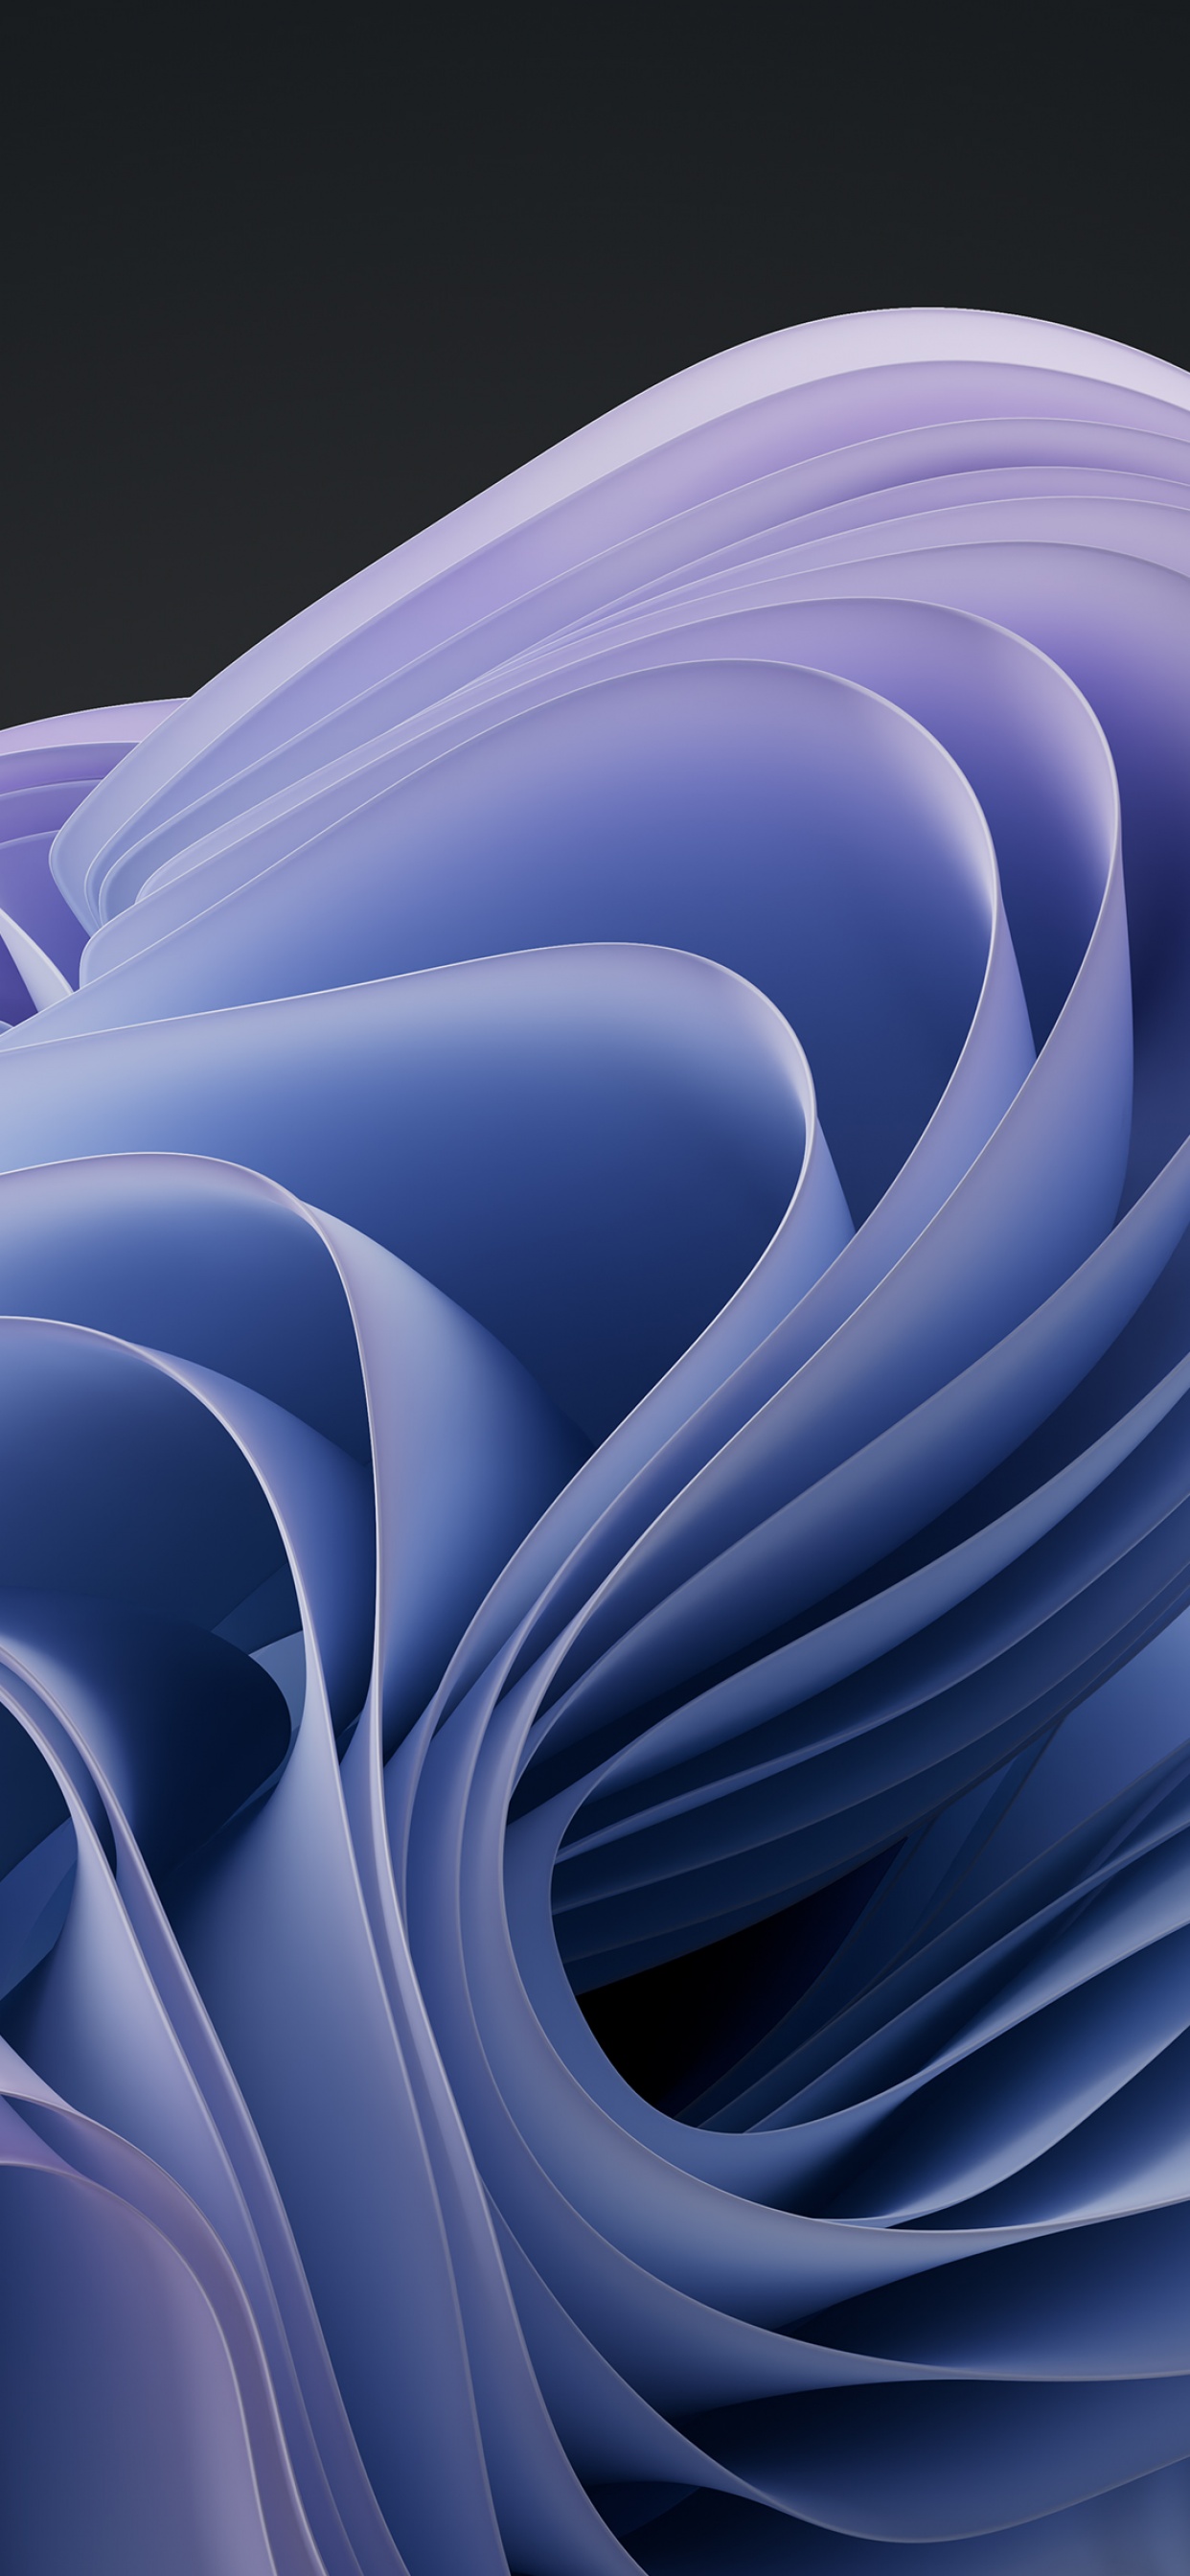 Surface Laptop 5 Wallpaper 4K, Stock, Blue abstract, Abstract, #9055